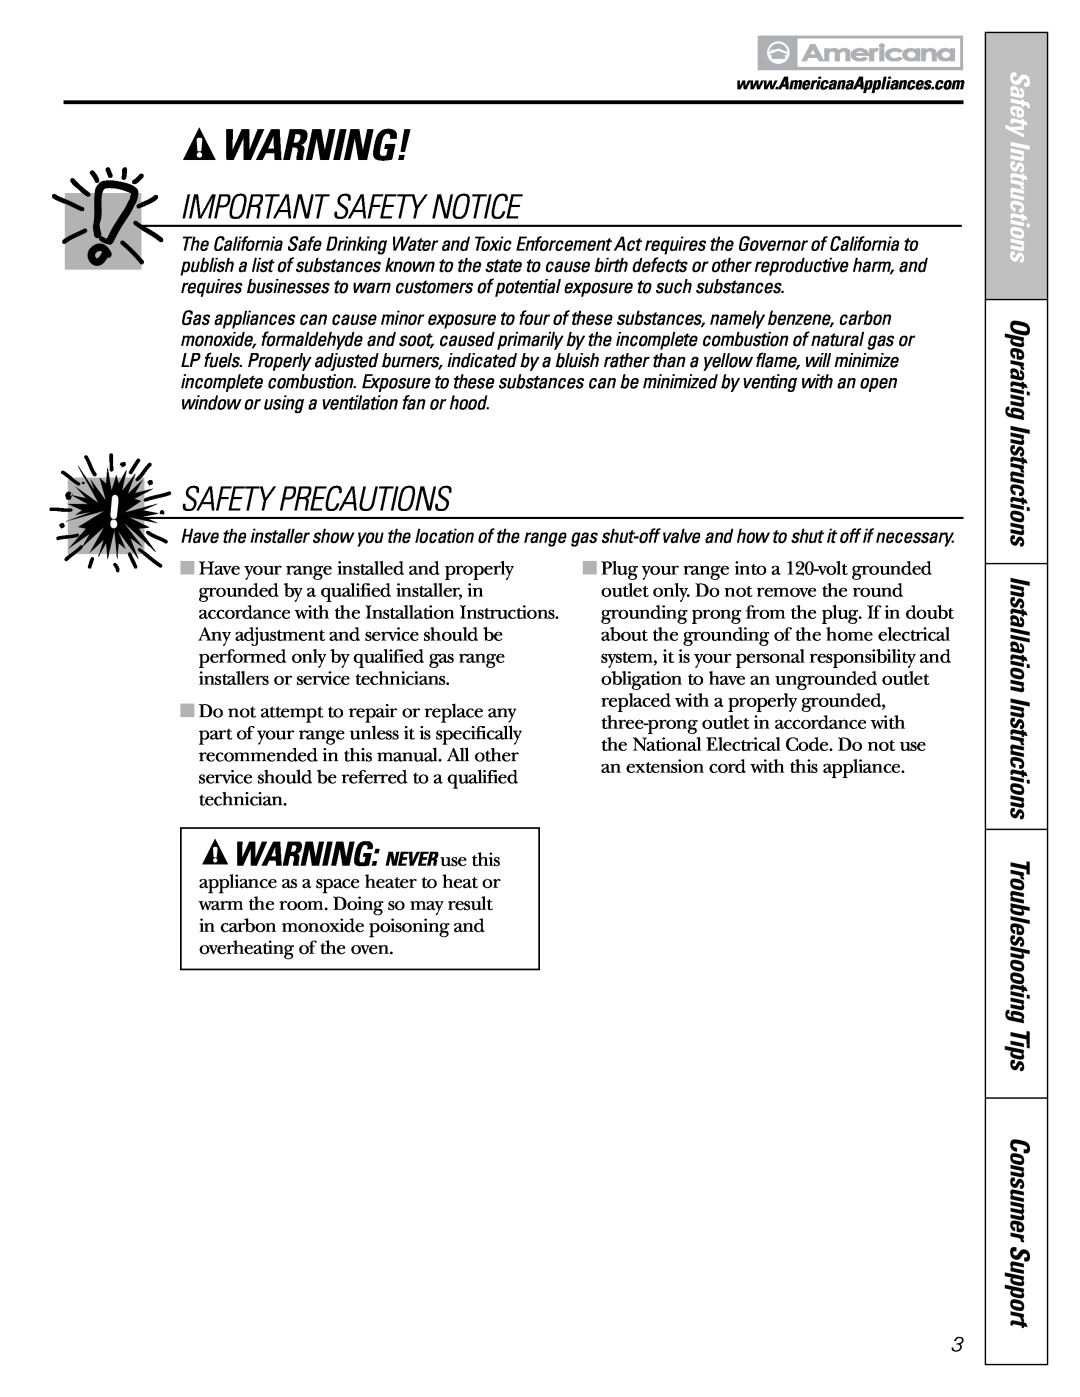 Americana Appliances AGBS300 installation instructions Important Safety Notice, Safety Precautions, WARNING: NEVER use this 